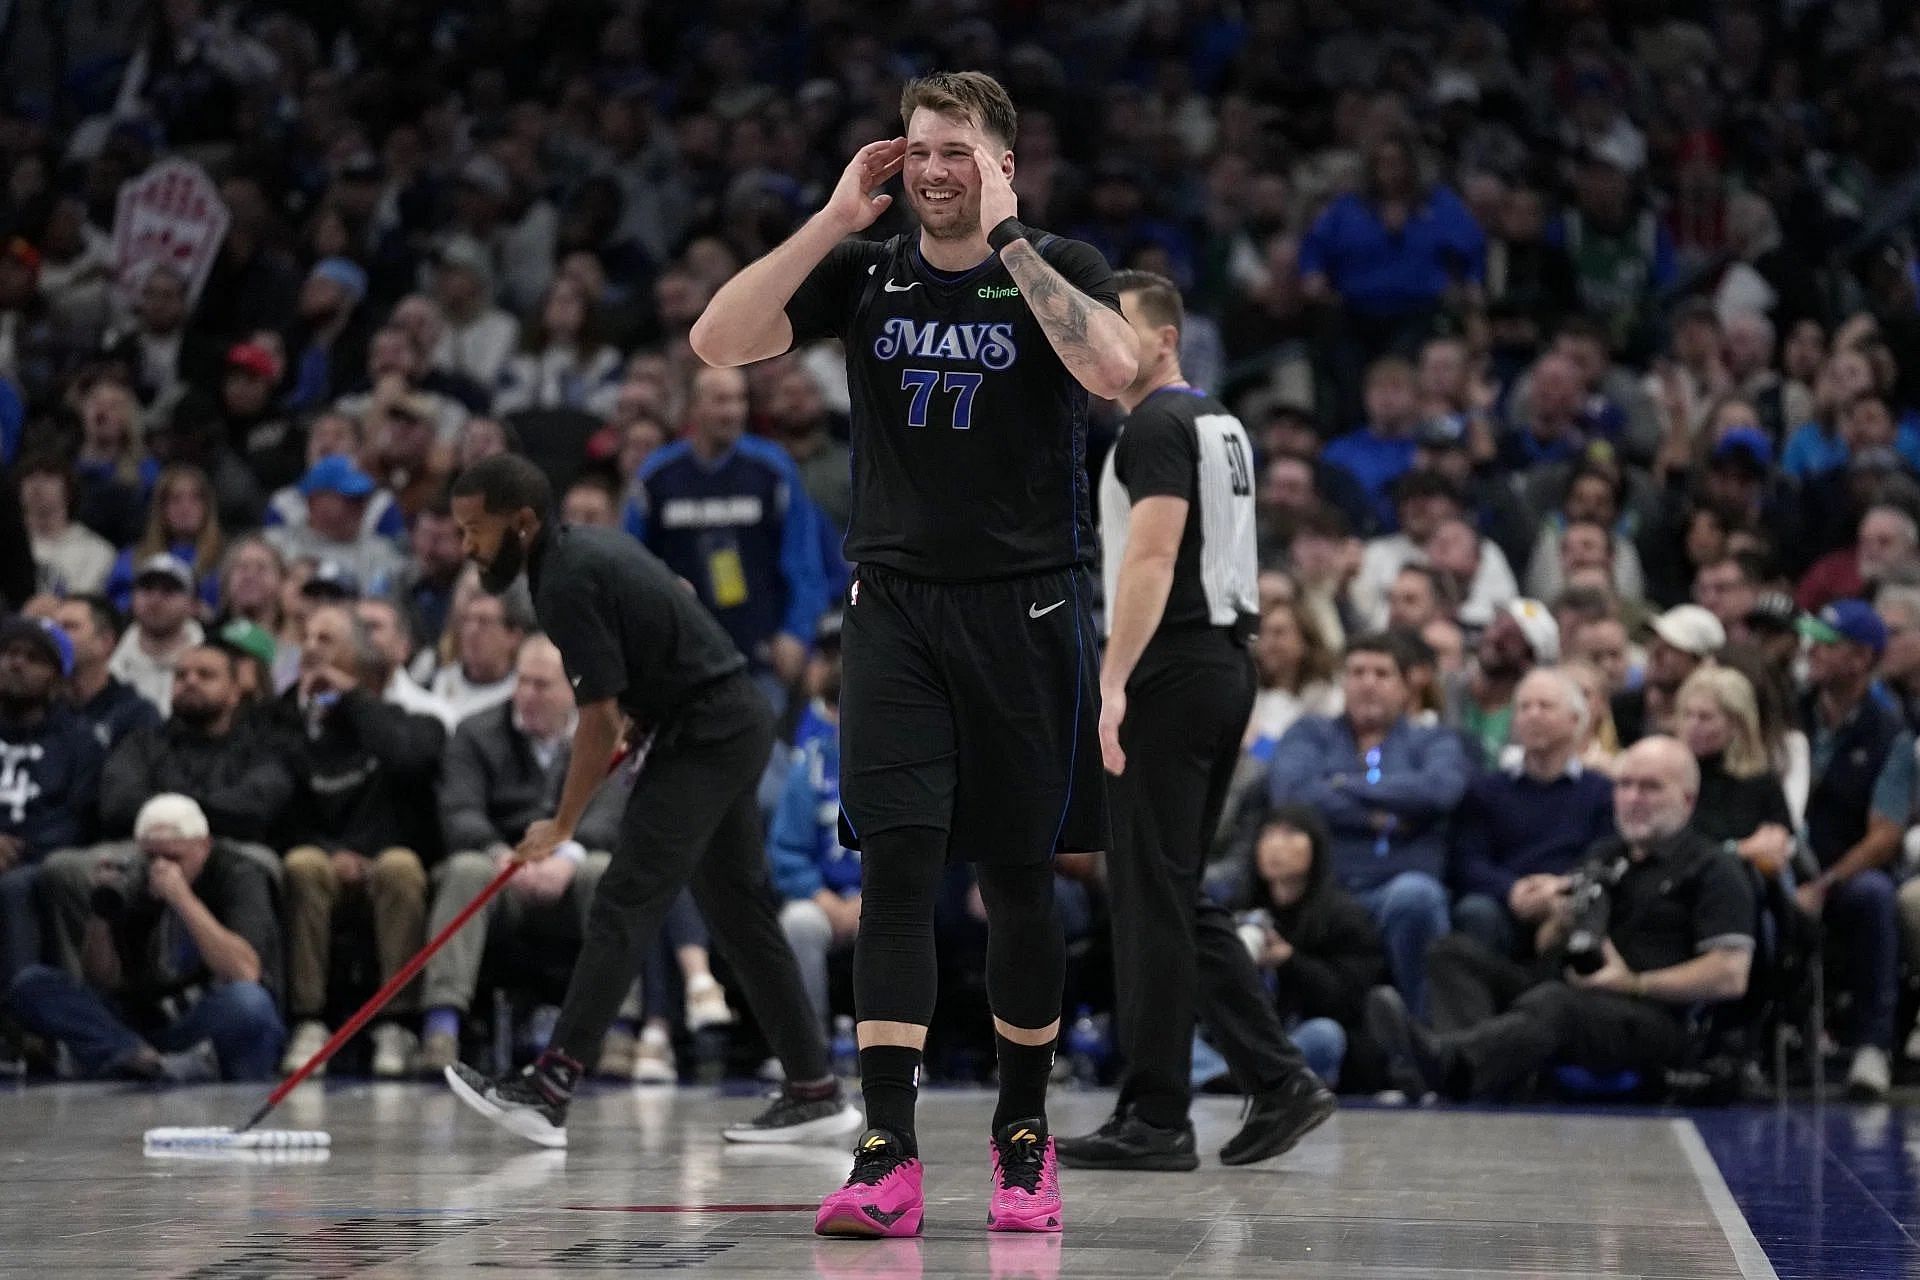 Dallas Mavericks All-Star Luka Doncic tied NBA great Larry Bird for ninth in the NBA all-time triple-double list on Saturday.